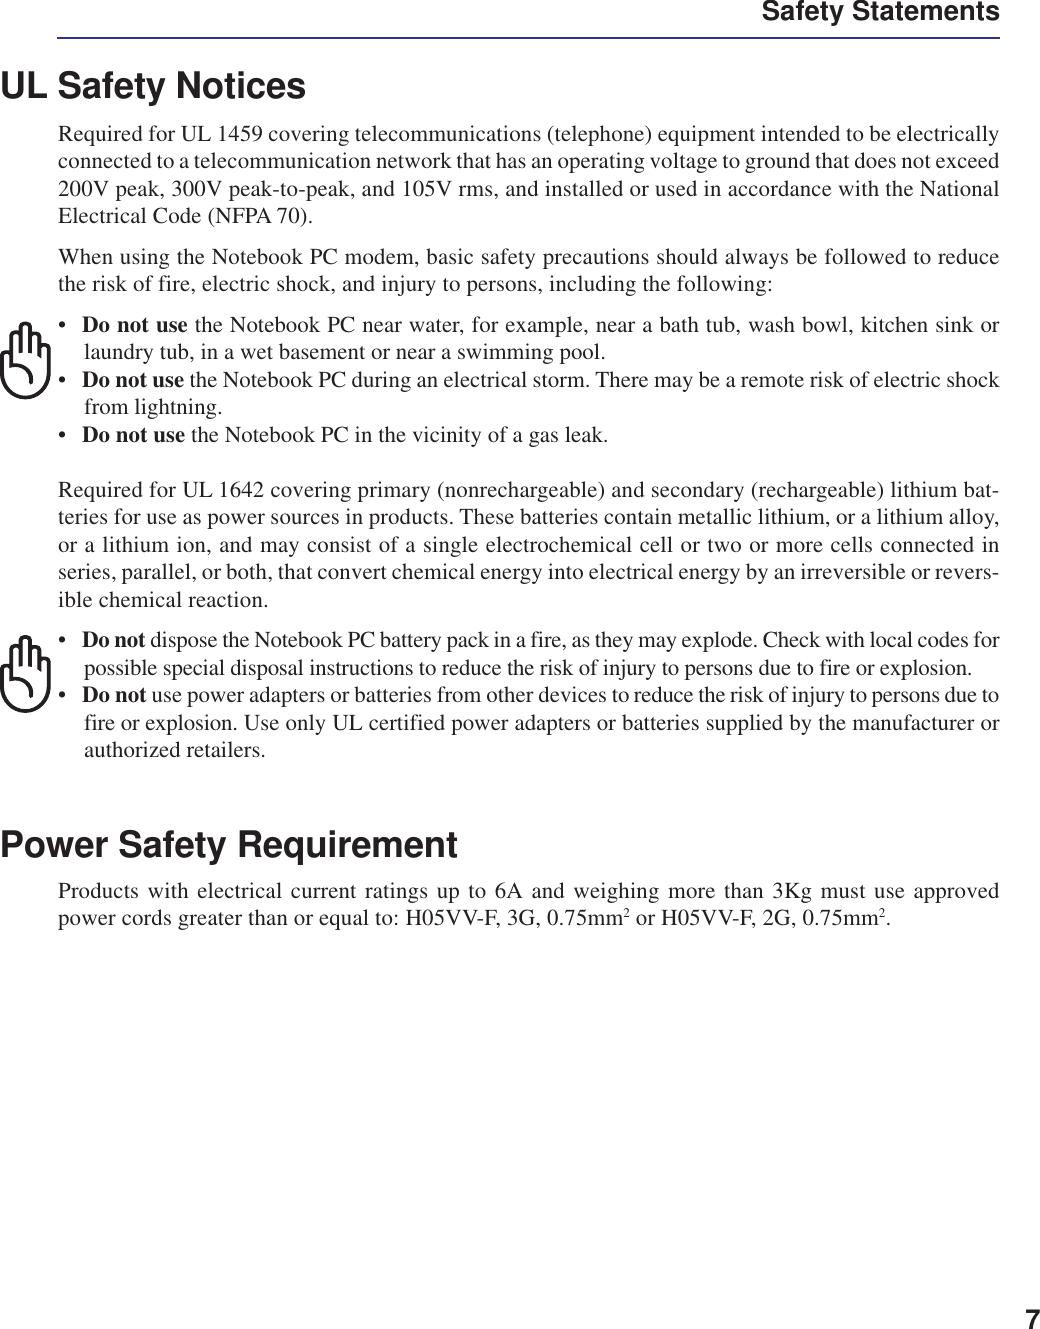 7UL Safety NoticesRequired for UL 1459 covering telecommunications (telephone) equipment intended to be electricallyconnected to a telecommunication network that has an operating voltage to ground that does not exceed200V peak, 300V peak-to-peak, and 105V rms, and installed or used in accordance with the NationalElectrical Code (NFPA 70).When using the Notebook PC modem, basic safety precautions should always be followed to reducethe risk of fire, electric shock, and injury to persons, including the following:•Do not use the Notebook PC near water, for example, near a bath tub, wash bowl, kitchen sink orlaundry tub, in a wet basement or near a swimming pool.•Do not use the Notebook PC during an electrical storm. There may be a remote risk of electric shockfrom lightning.•Do not use the Notebook PC in the vicinity of a gas leak.Required for UL 1642 covering primary (nonrechargeable) and secondary (rechargeable) lithium bat-teries for use as power sources in products. These batteries contain metallic lithium, or a lithium alloy,or a lithium ion, and may consist of a single electrochemical cell or two or more cells connected inseries, parallel, or both, that convert chemical energy into electrical energy by an irreversible or revers-ible chemical reaction.•Do not dispose the Notebook PC battery pack in a fire, as they may explode. Check with local codes forpossible special disposal instructions to reduce the risk of injury to persons due to fire or explosion.•Do not use power adapters or batteries from other devices to reduce the risk of injury to persons due tofire or explosion. Use only UL certified power adapters or batteries supplied by the manufacturer orauthorized retailers.Power Safety RequirementProducts with electrical current ratings up to 6A and weighing more than 3Kg must use approvedpower cords greater than or equal to: H05VV-F, 3G, 0.75mm2 or H05VV-F, 2G, 0.75mm2.Safety Statements